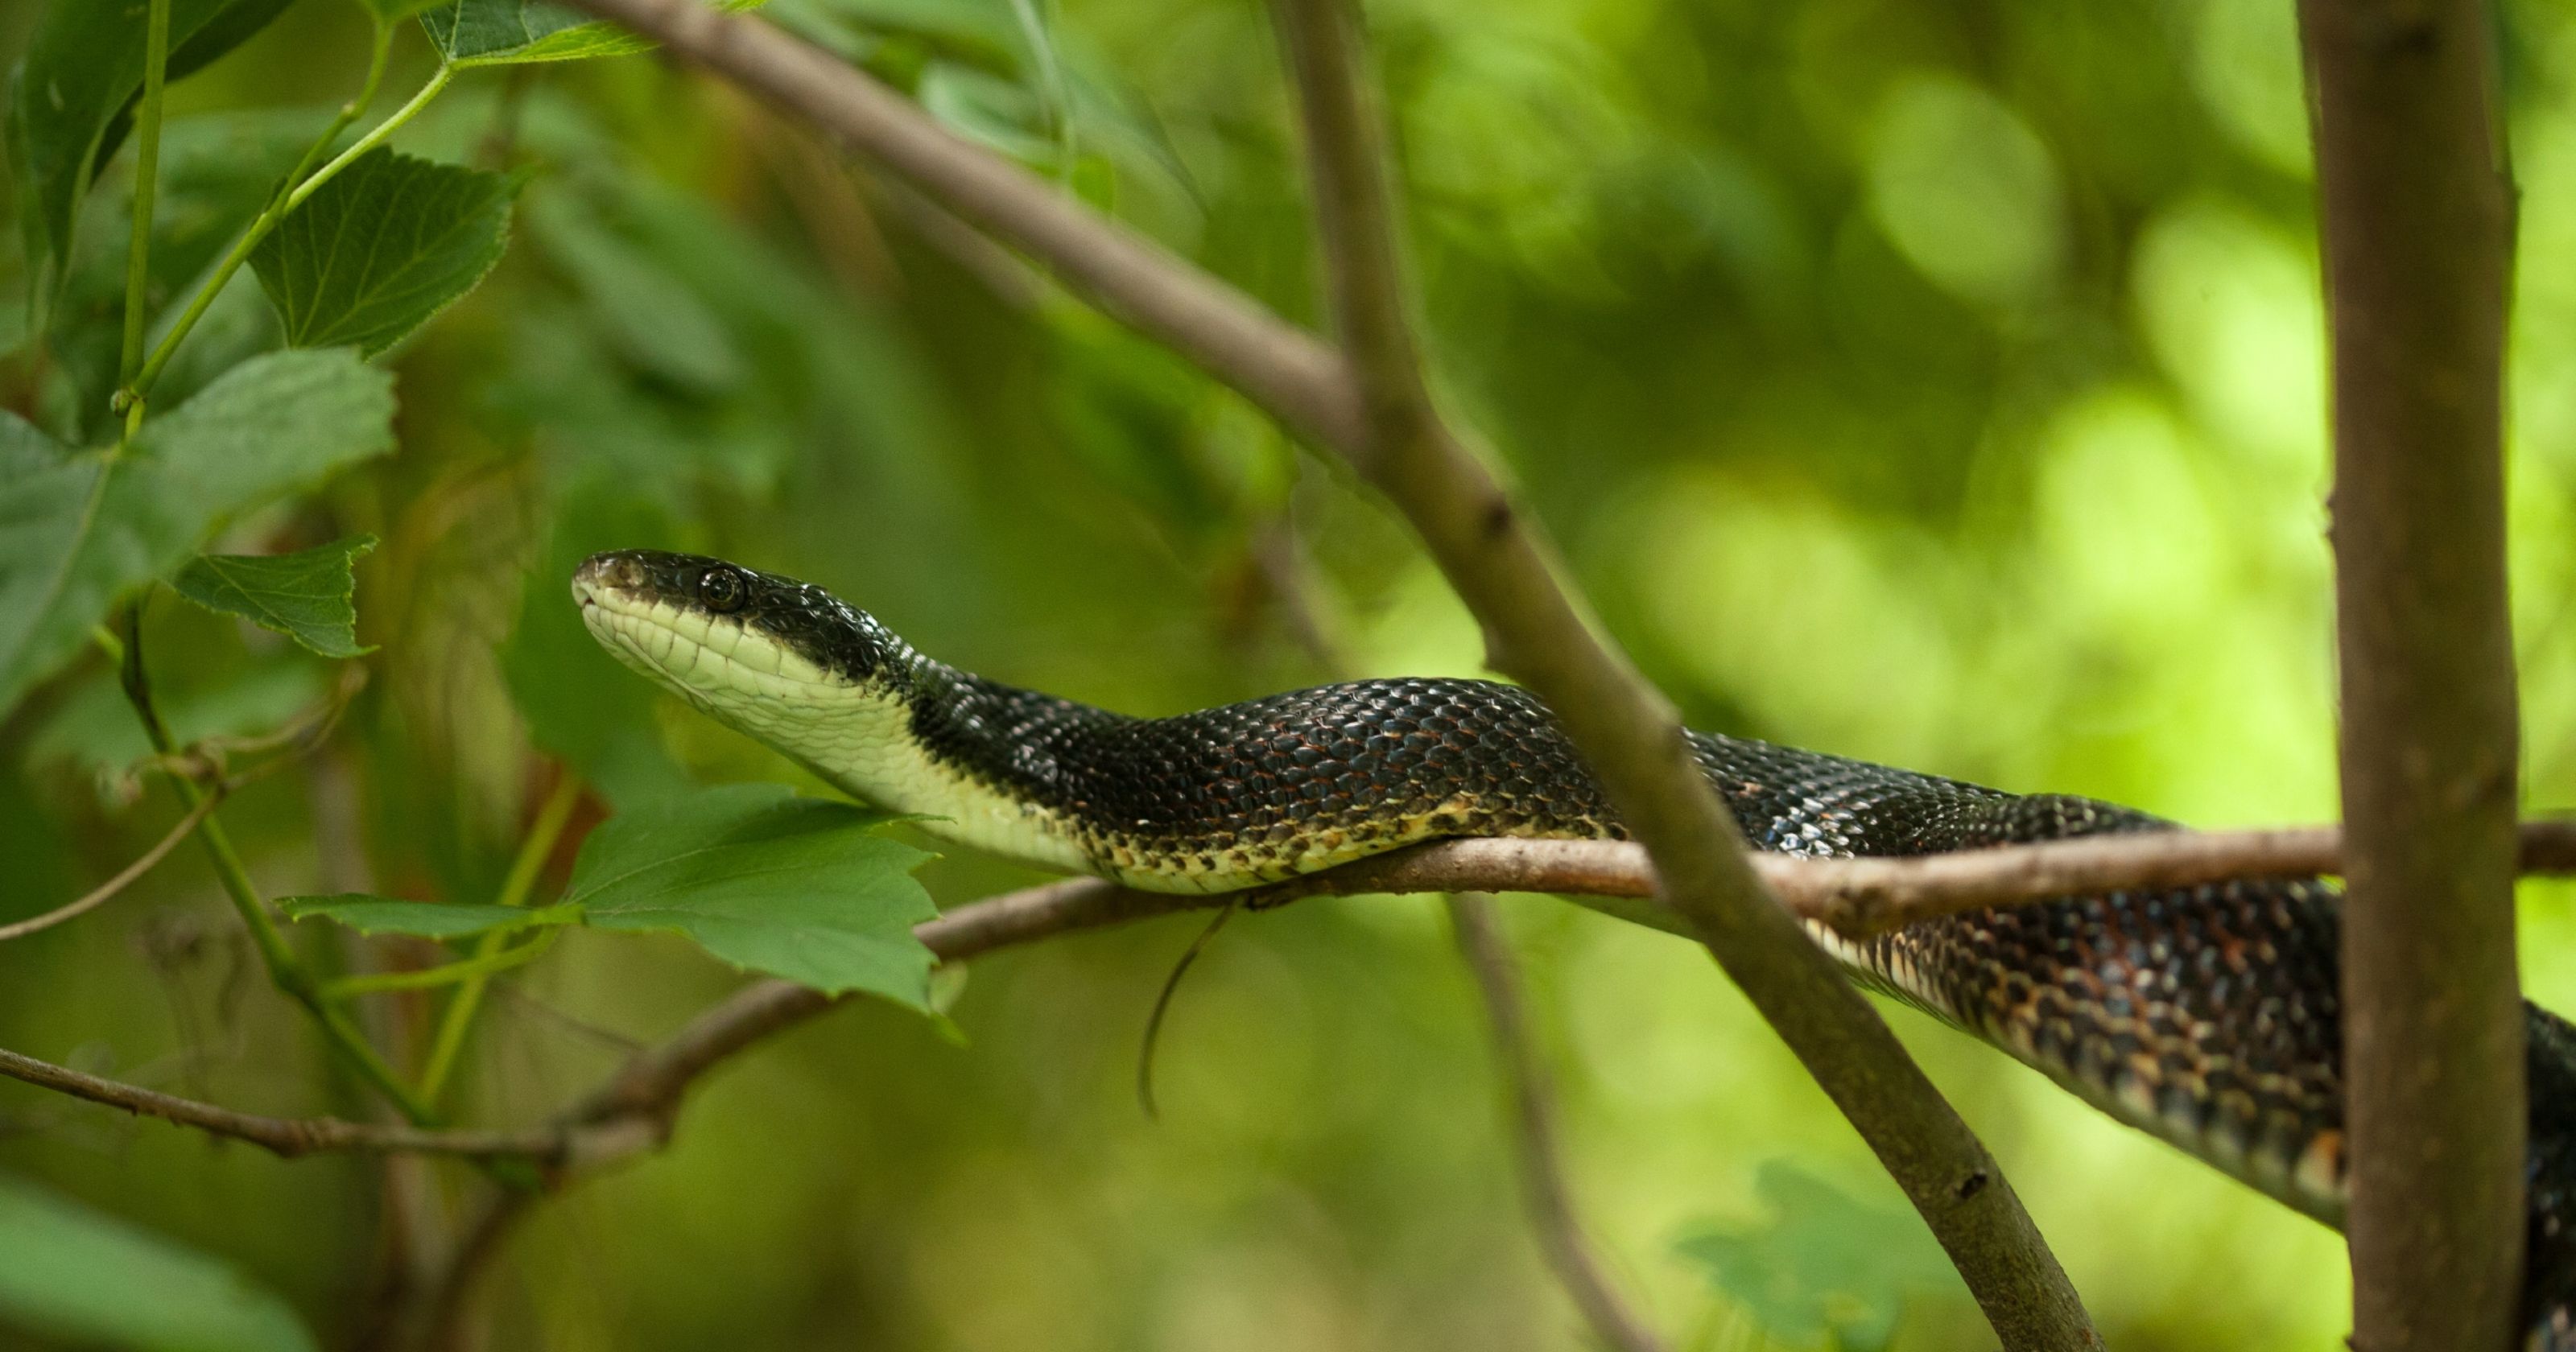 The black ratsnake is a misunderstood and targeted creature